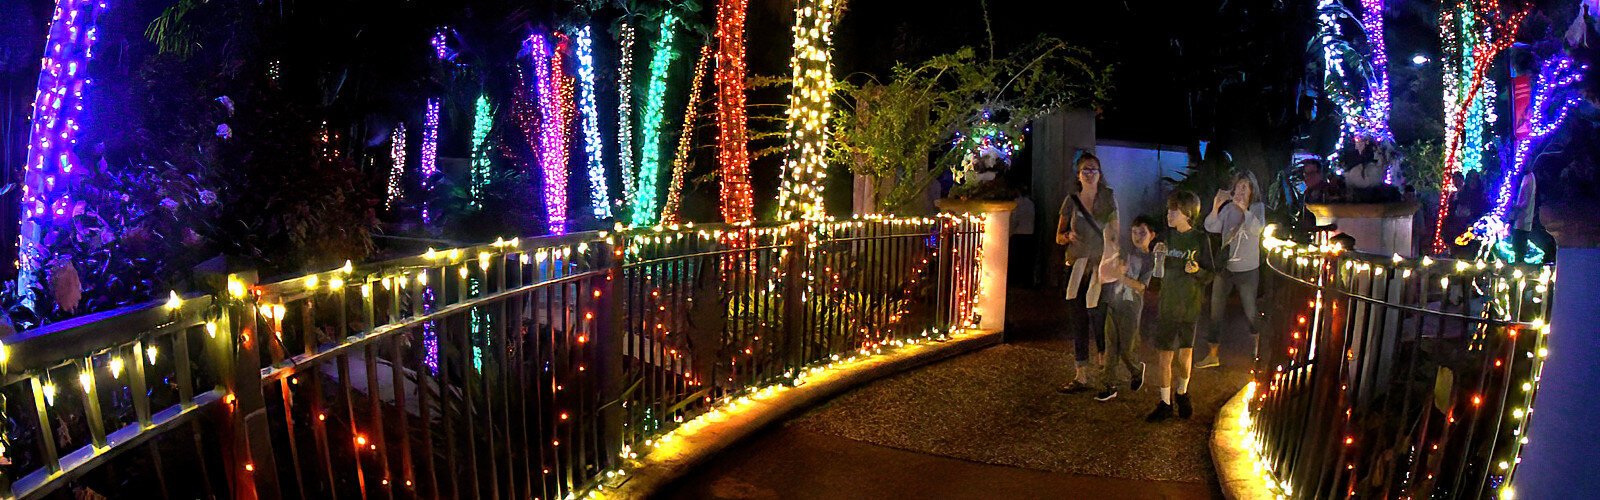 Thousands of multicolored LED lights provide a magical setting at the Florida Botanical Gardens Holiday Lights in the Gardens in Largo this December.